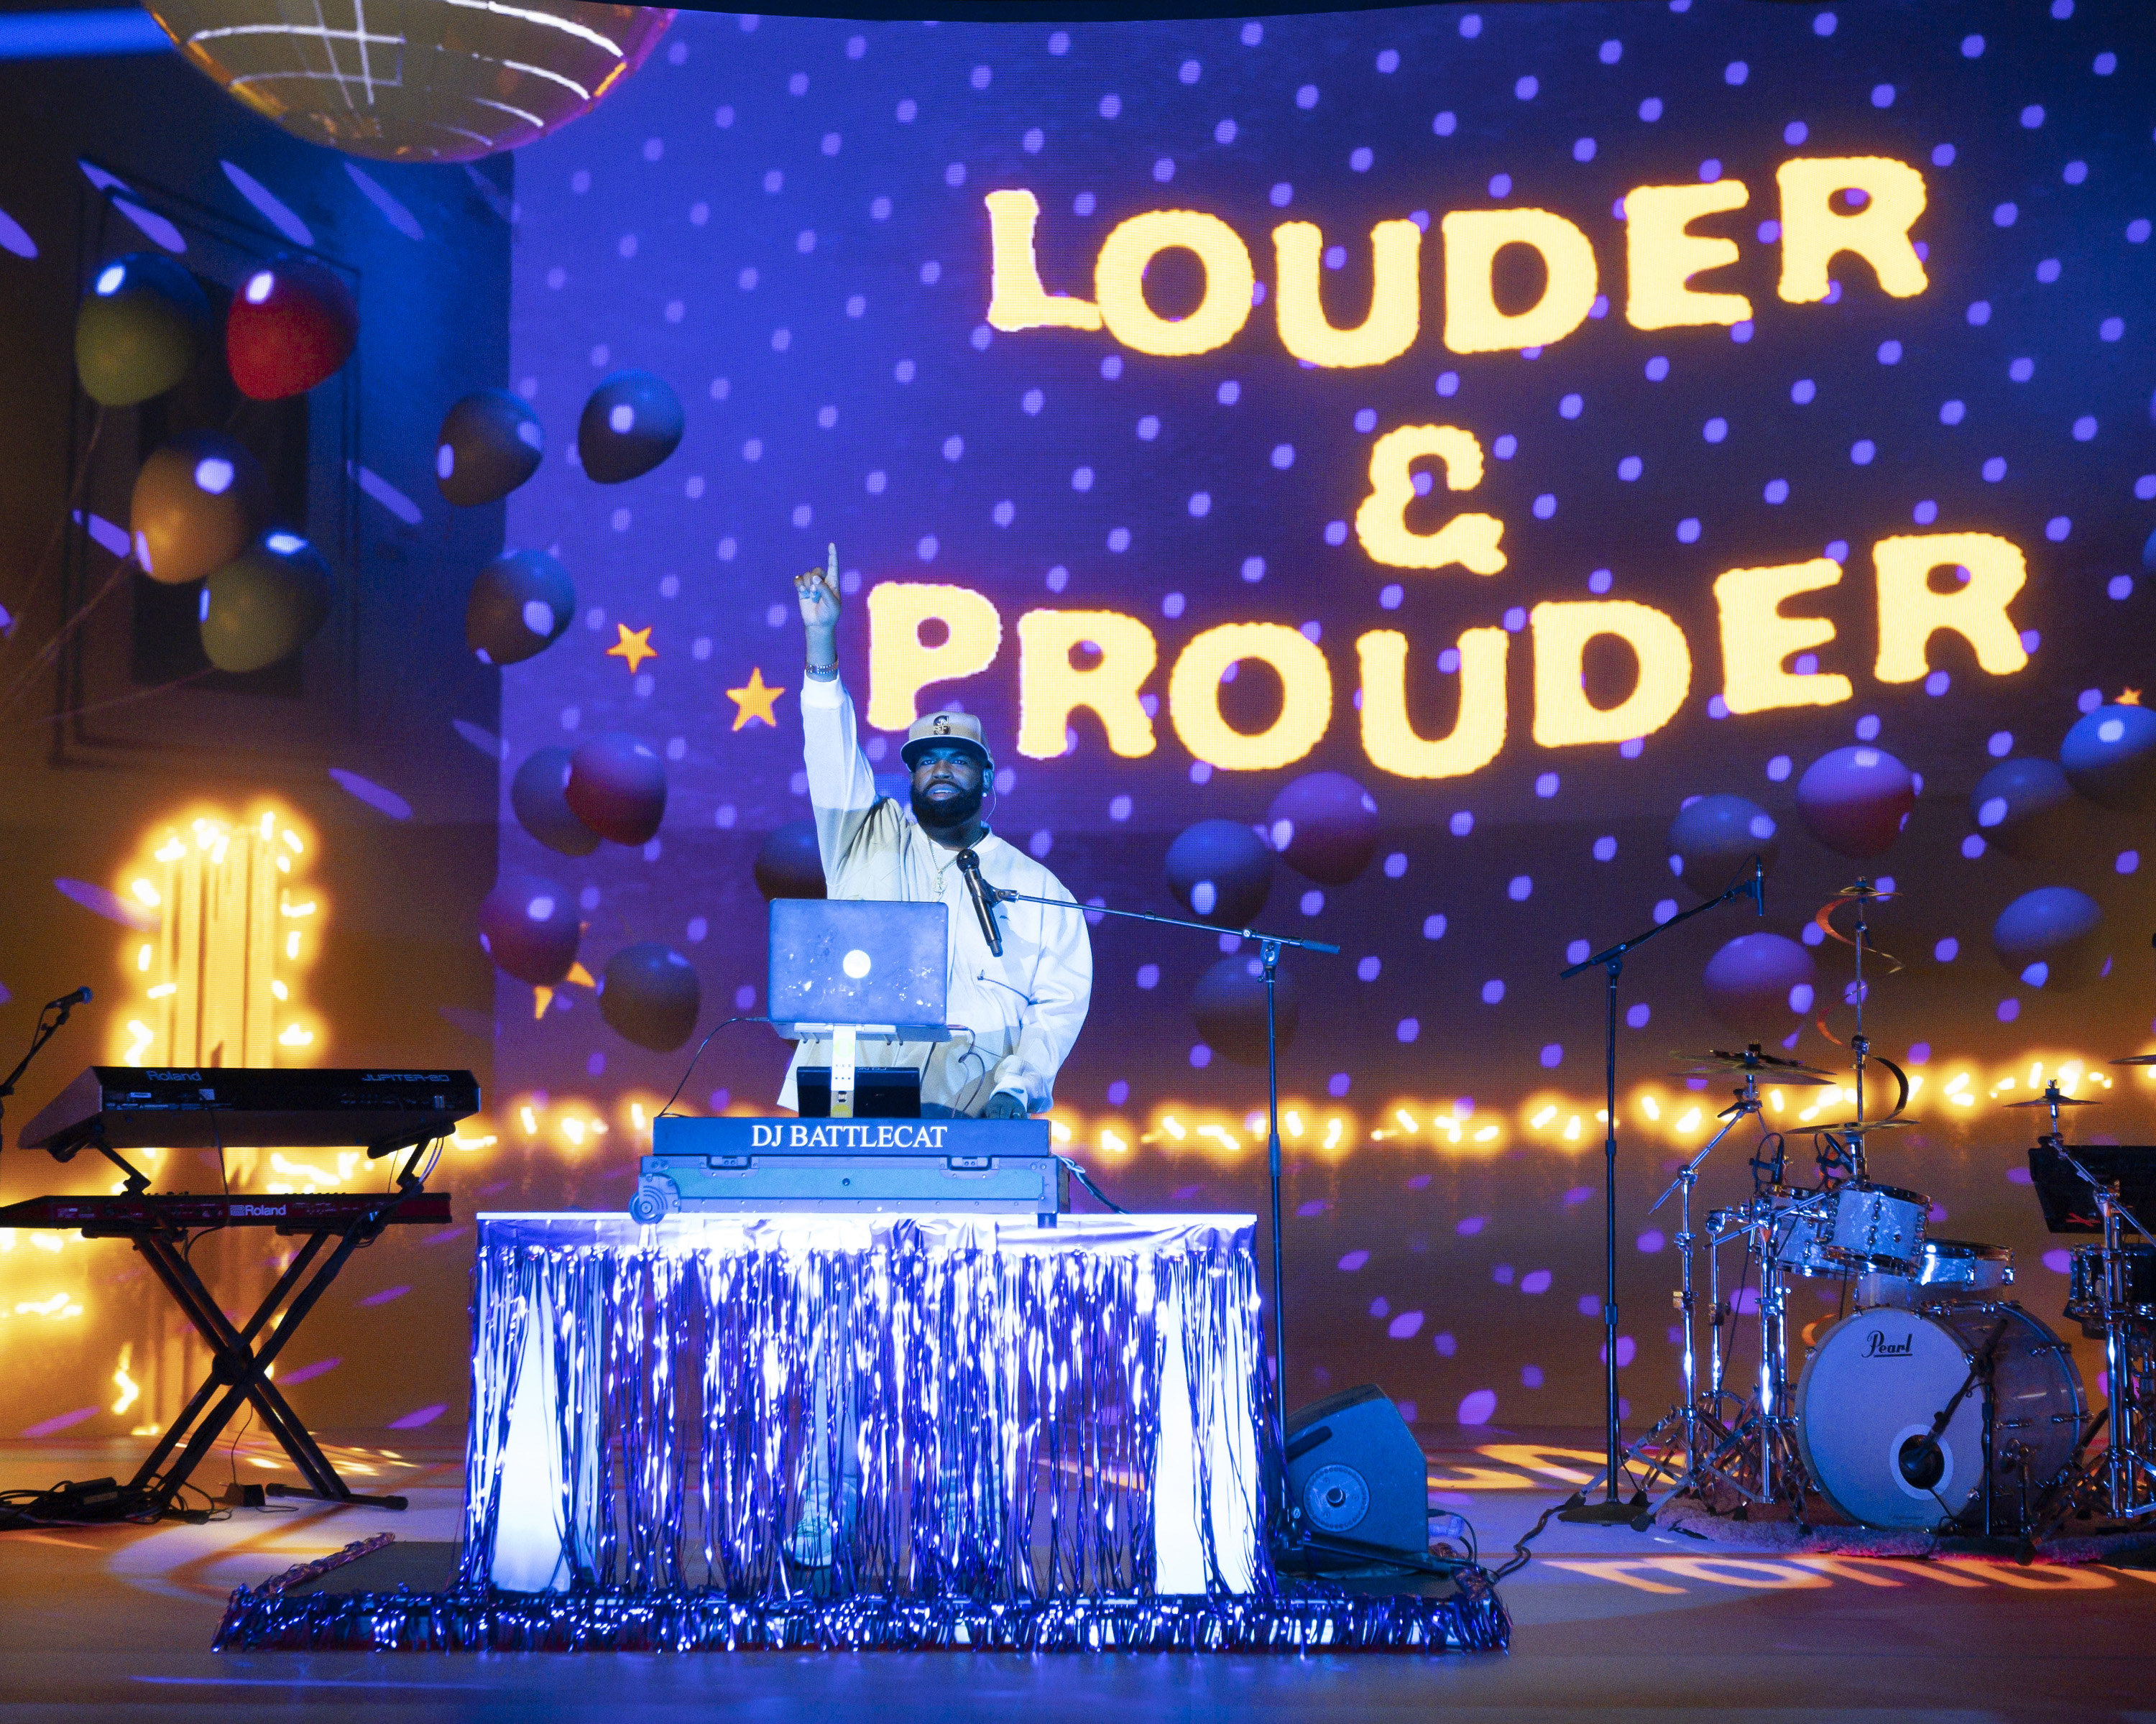 DJ Battlecat raises one finger in the air while spinning at turntable on stage in front of instruments, balloons, and a project light that reads &quot;Louder &amp; Prouder.&quot;